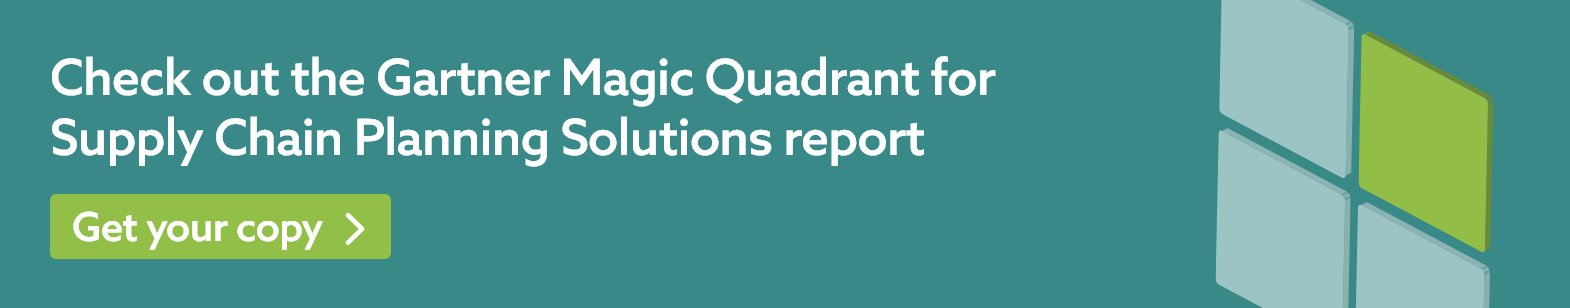 OMP named a Leader in the Gartner® Magic Quadrant™ for Supply Chain Planning Solutions for the 9th consecutive time